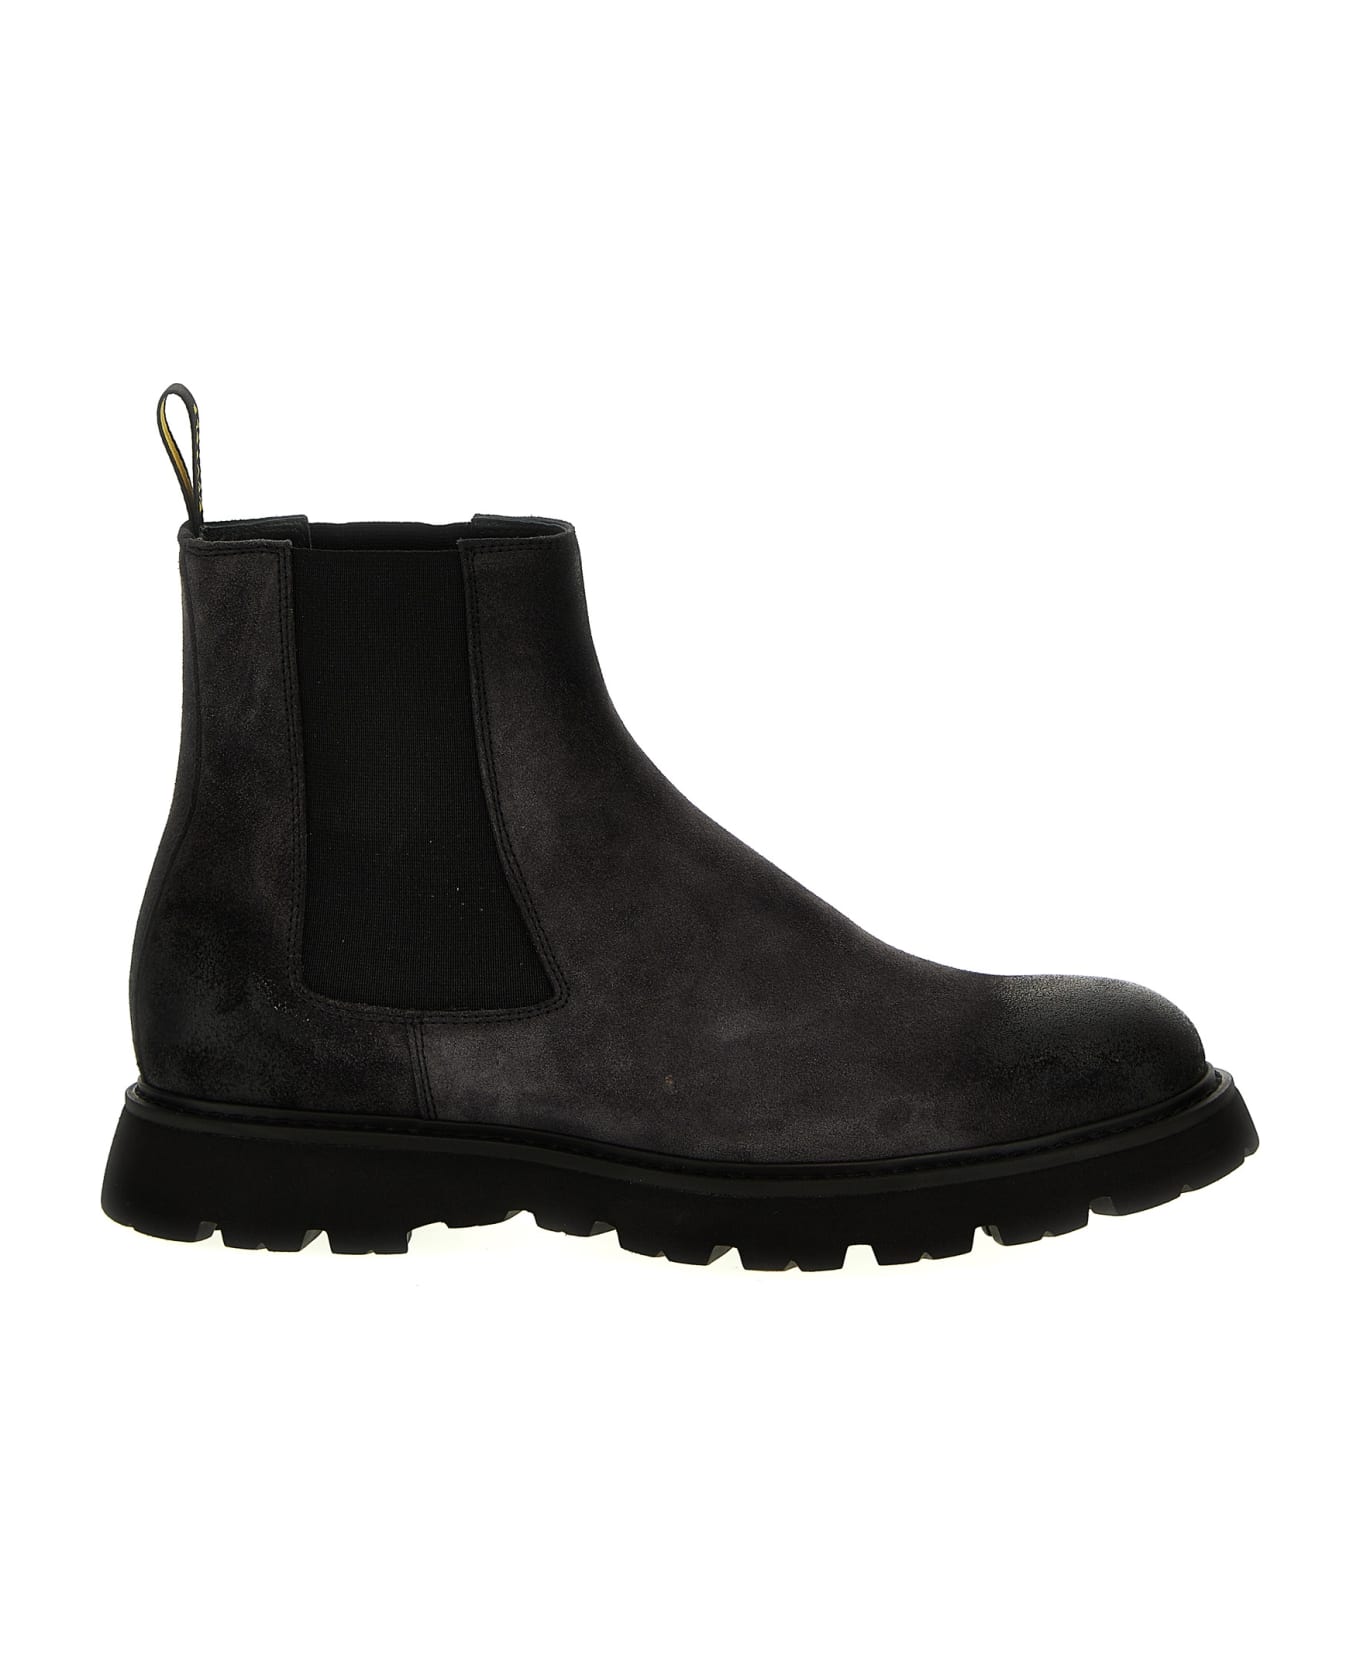 Doucal's Crust Chelsea Boots - ANTHRACITE ブーツ